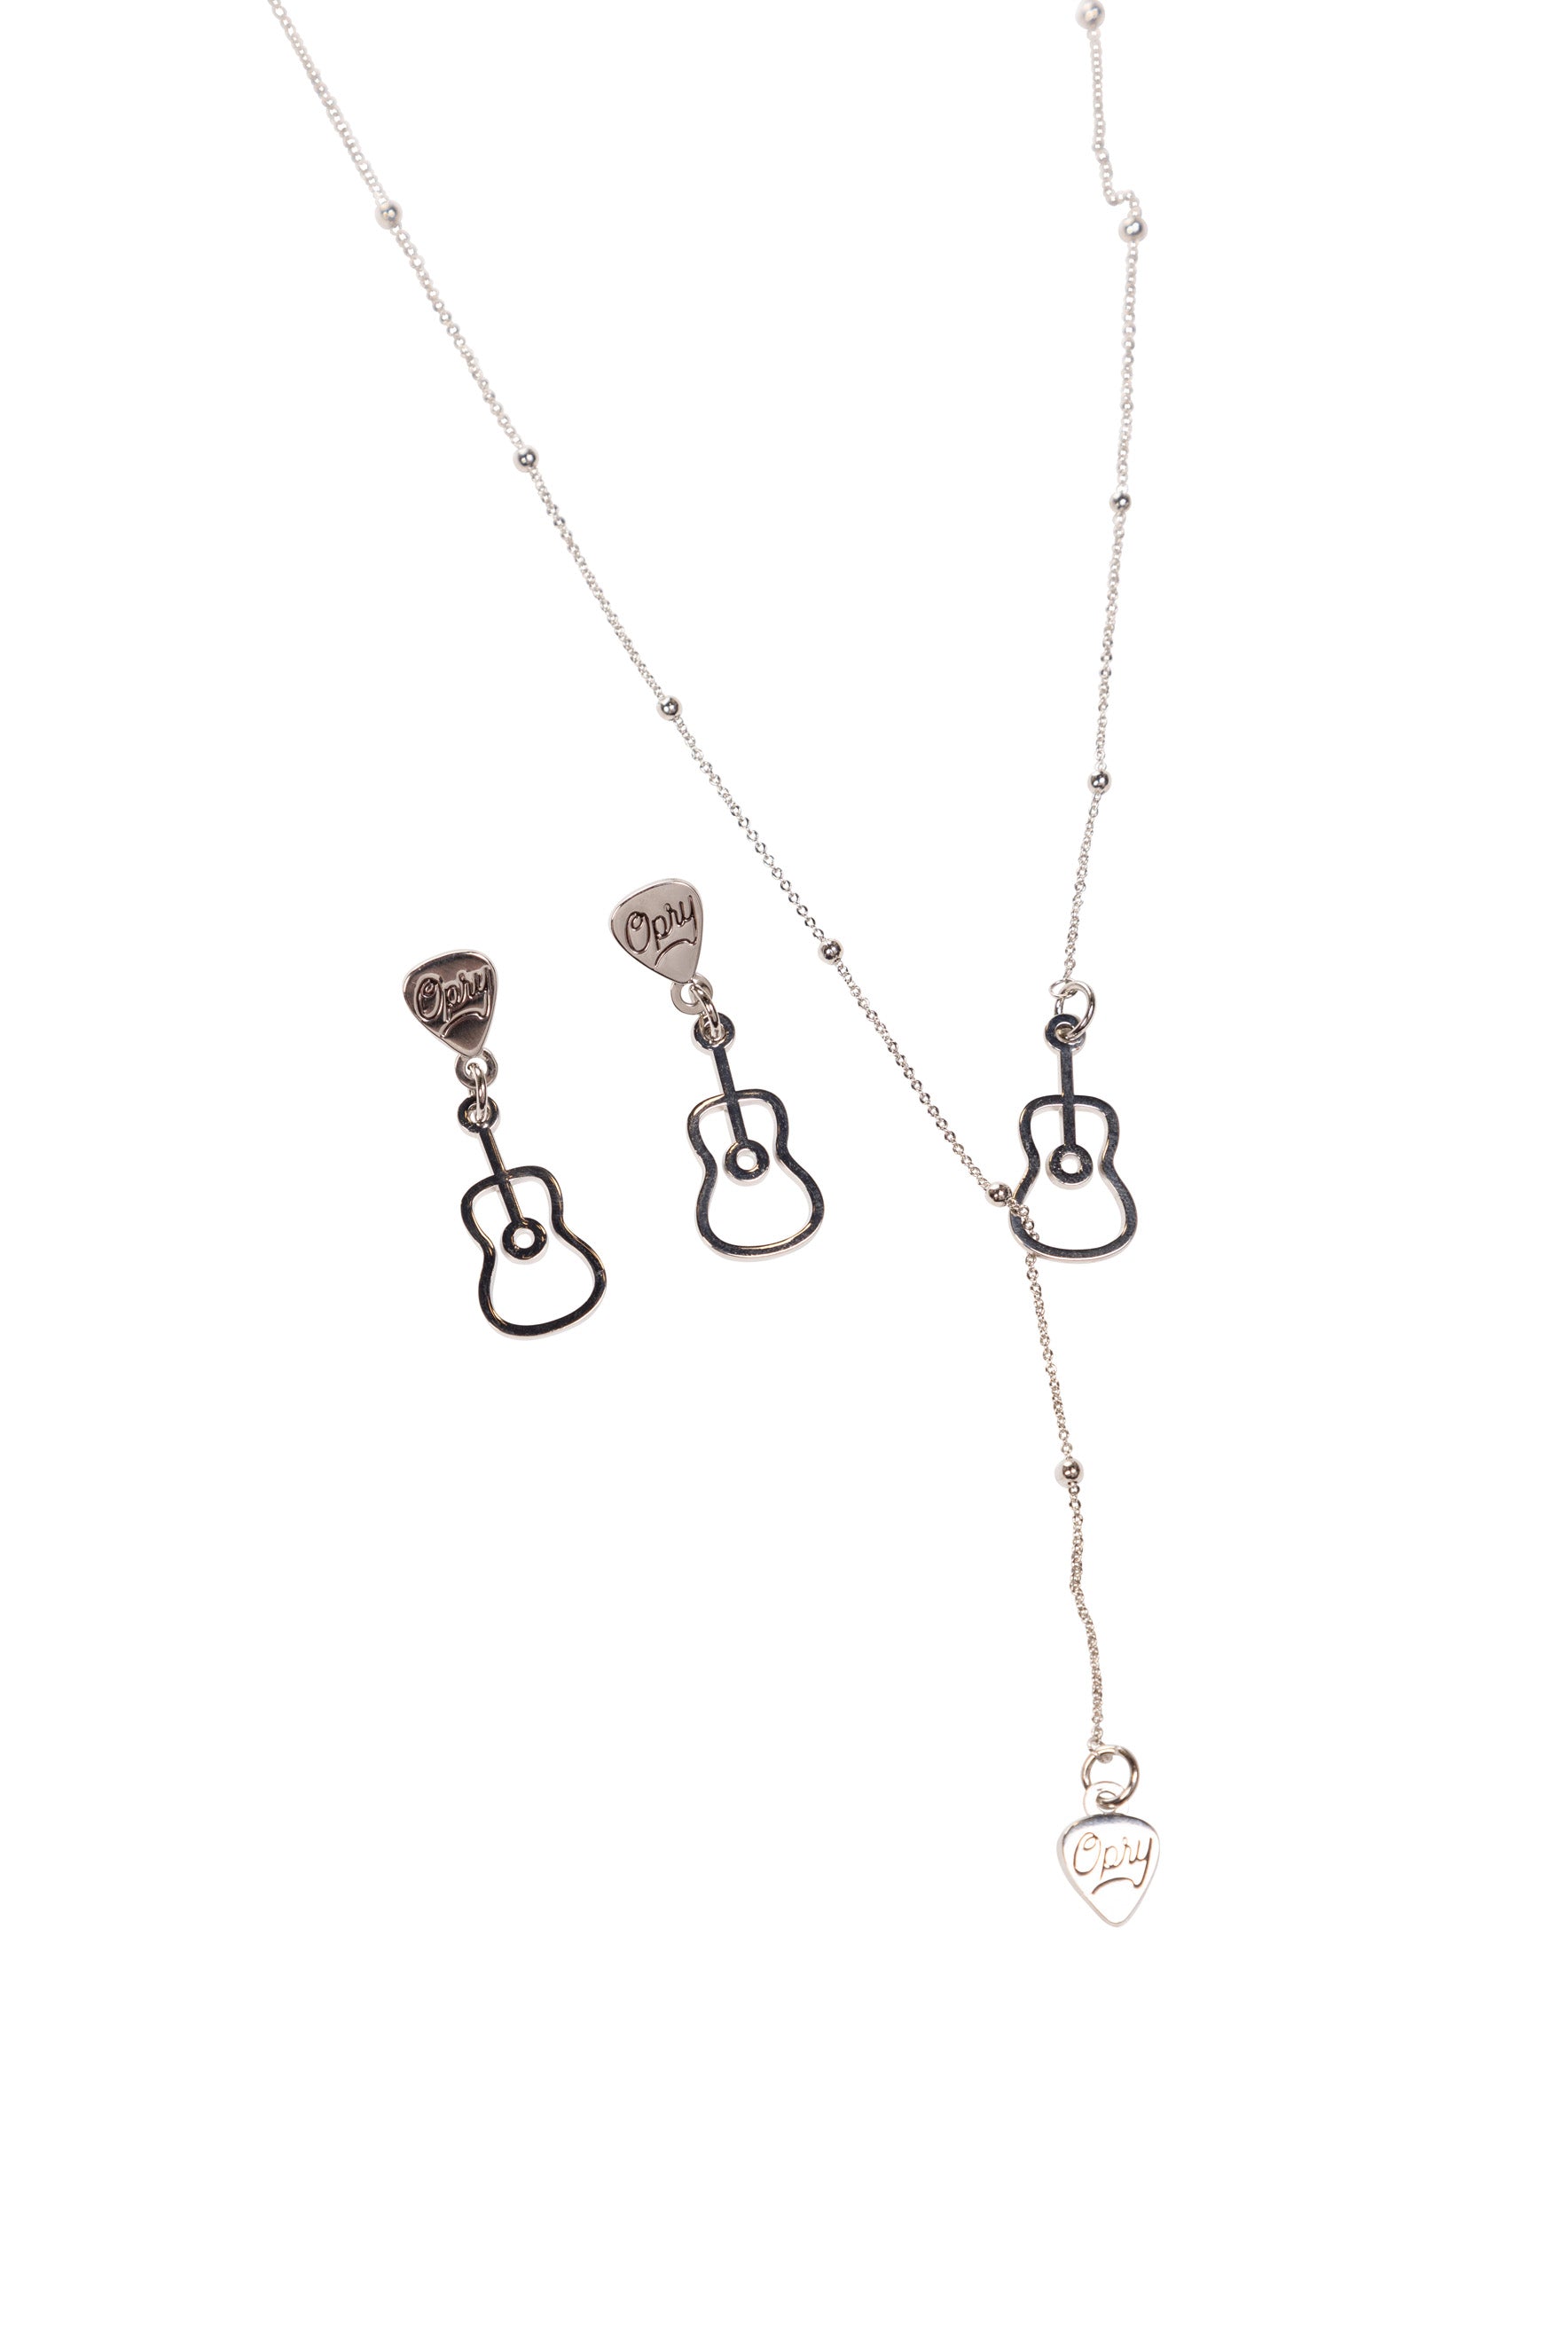 Opry Silver Guitar Necklace